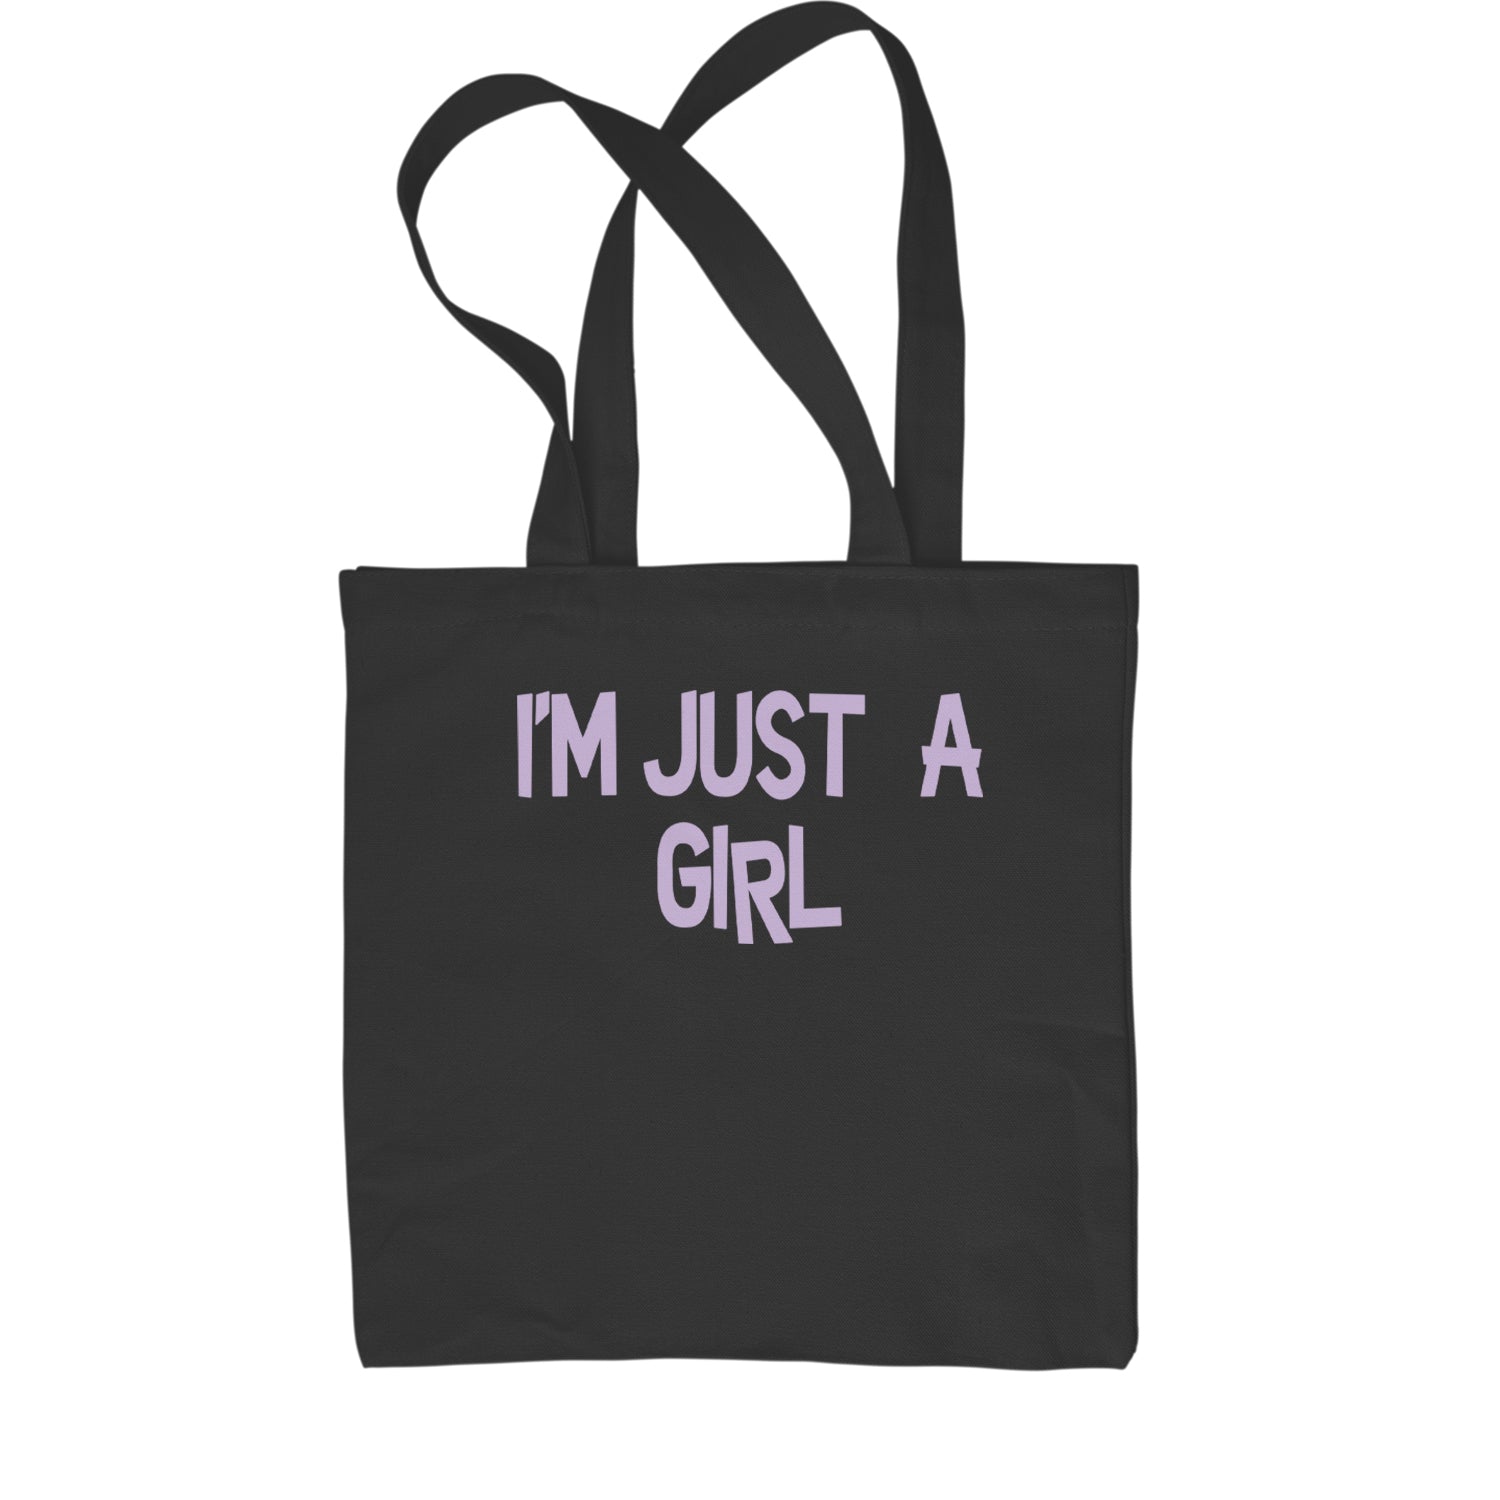 I'm Just A Girl Guts Music Shopping Tote Bag